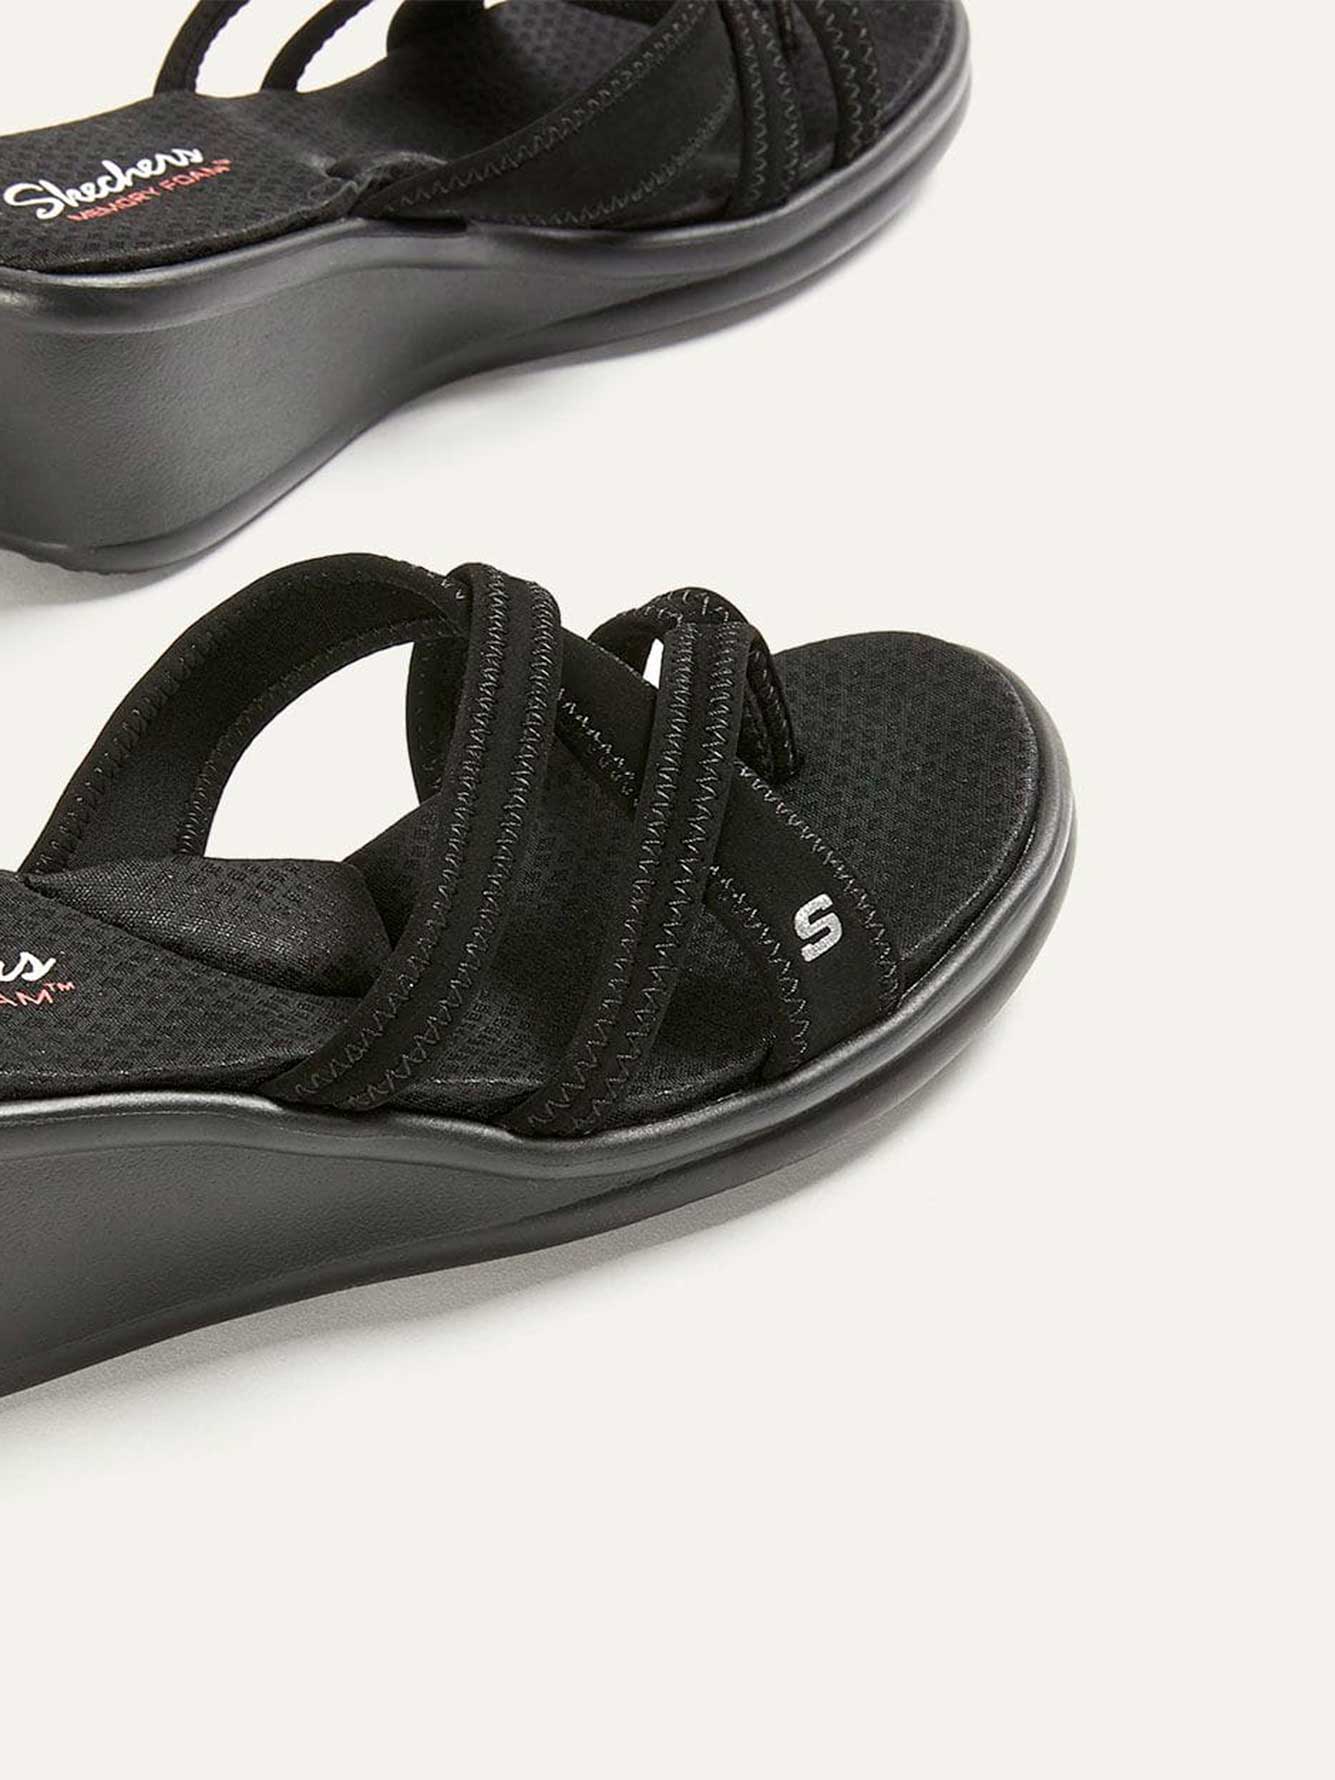 Skechers Rumblers, Young at Heart - Wide Width Sandals | Penningtons